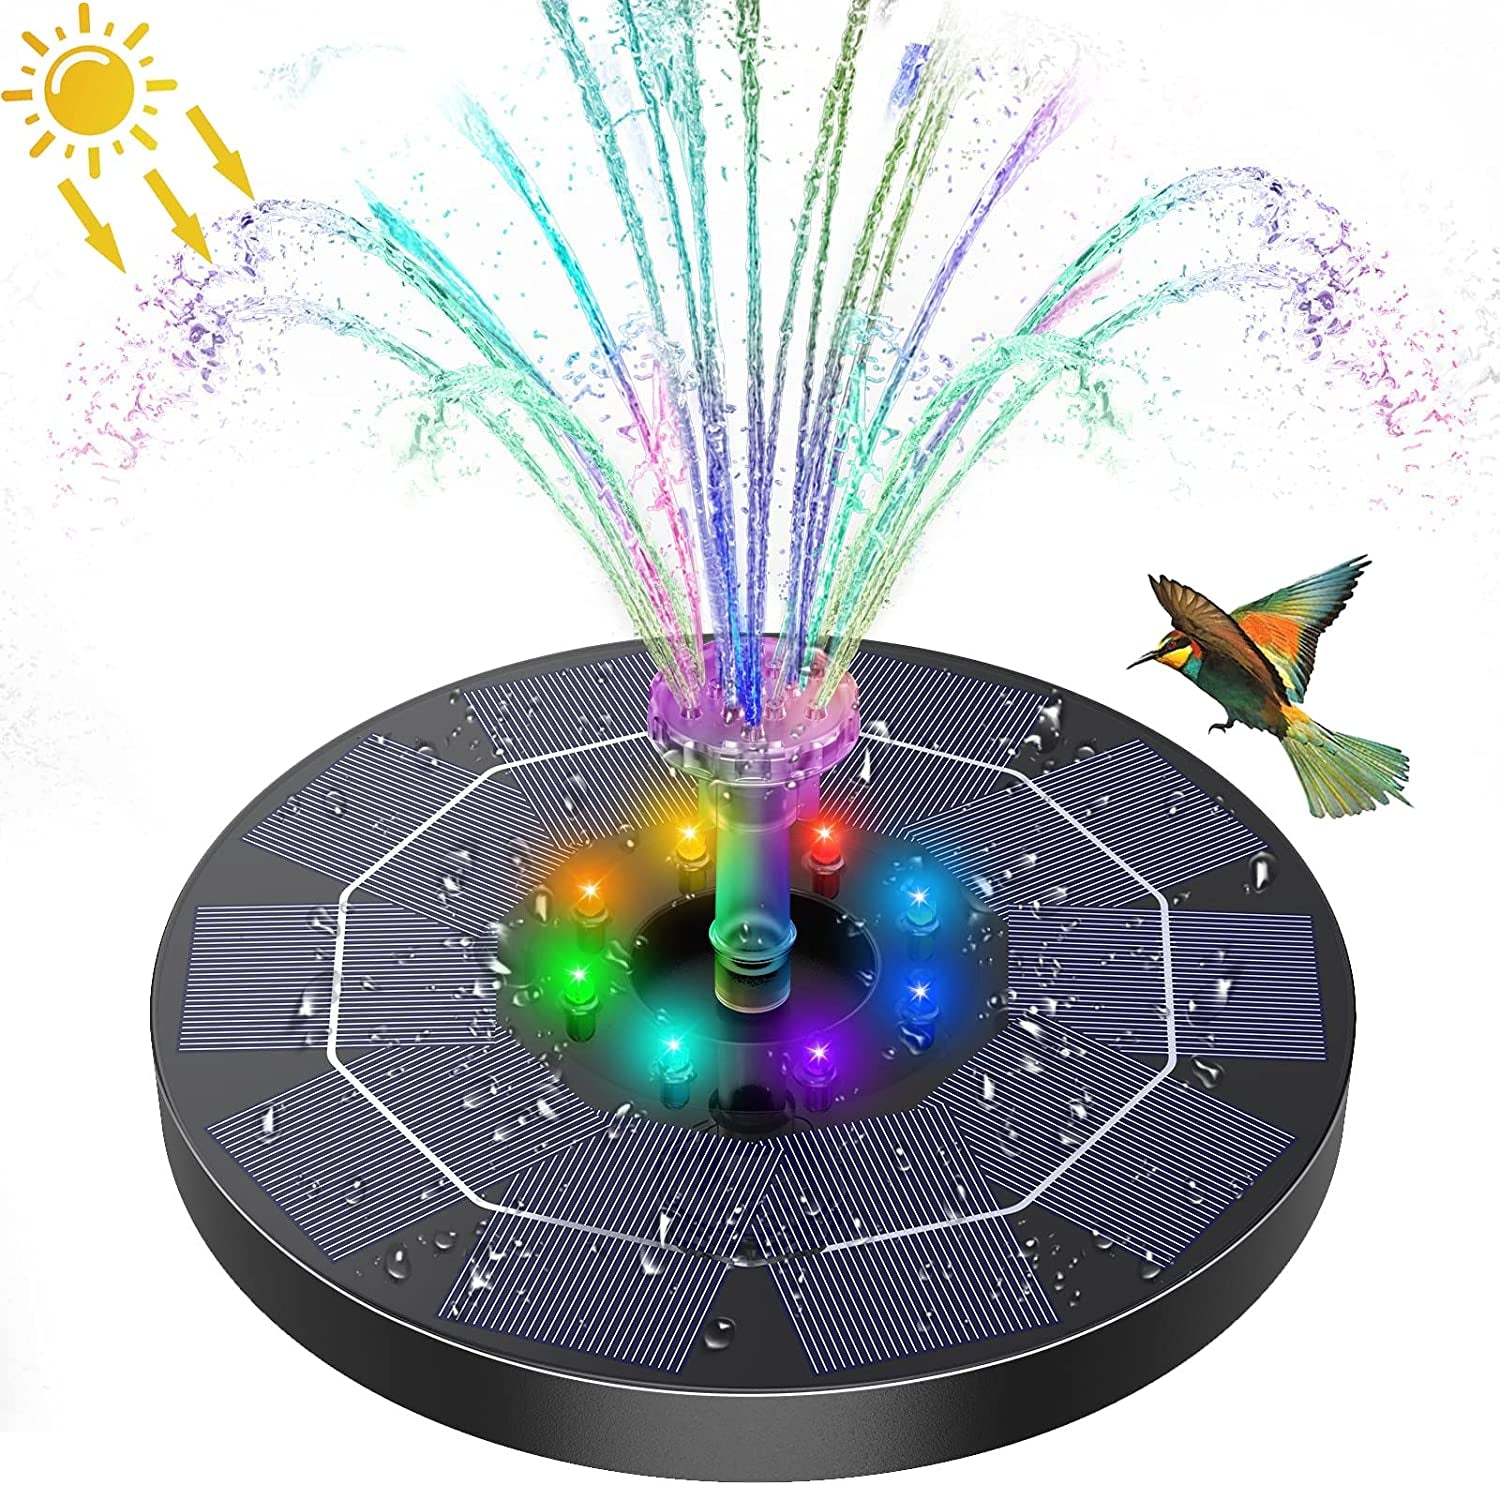 TGAHTMI, Solar Fountain 3.5W Bird Bath Fountain 7 Colors Leds Lights Upgraded Solar Powered Water Fountain Pump with 6 Nozzles for Outdoor, Pond, Pool, Fish Tank, Patio, Garden Decoration